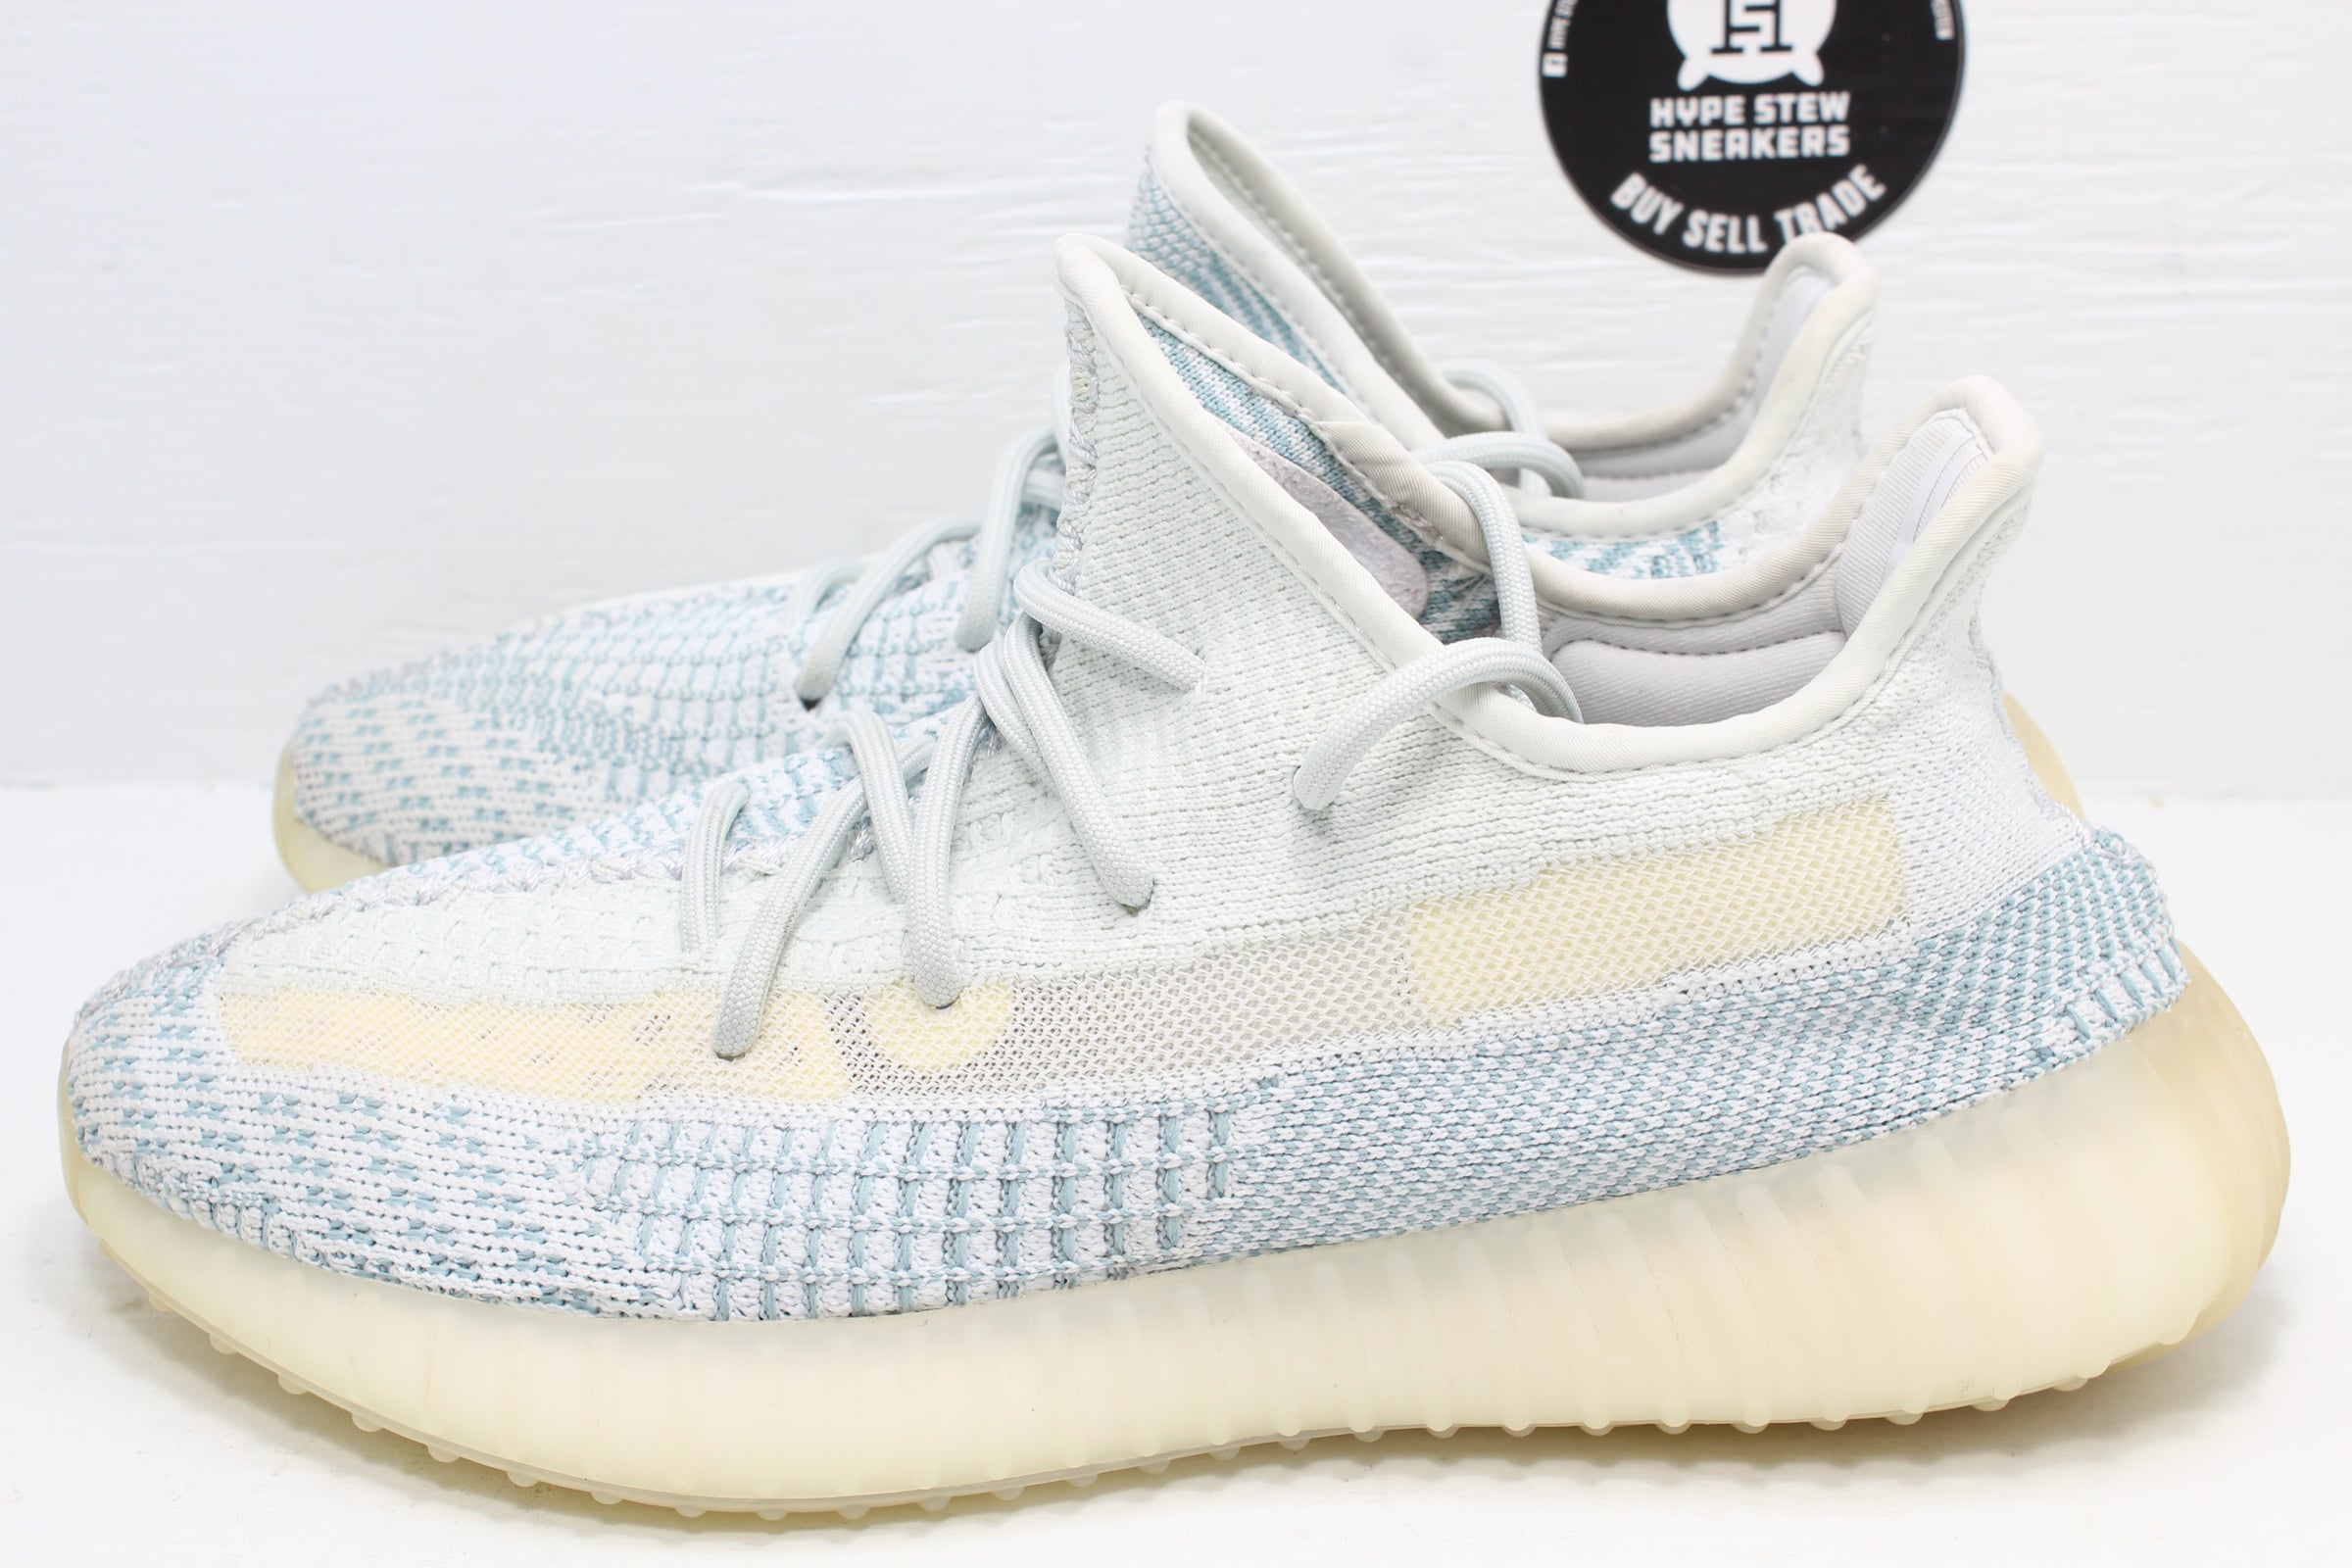 Adidas Yeezy Boost V2 Cloud White (Non-Reflective) | Hype Stew Sneakers Detroit